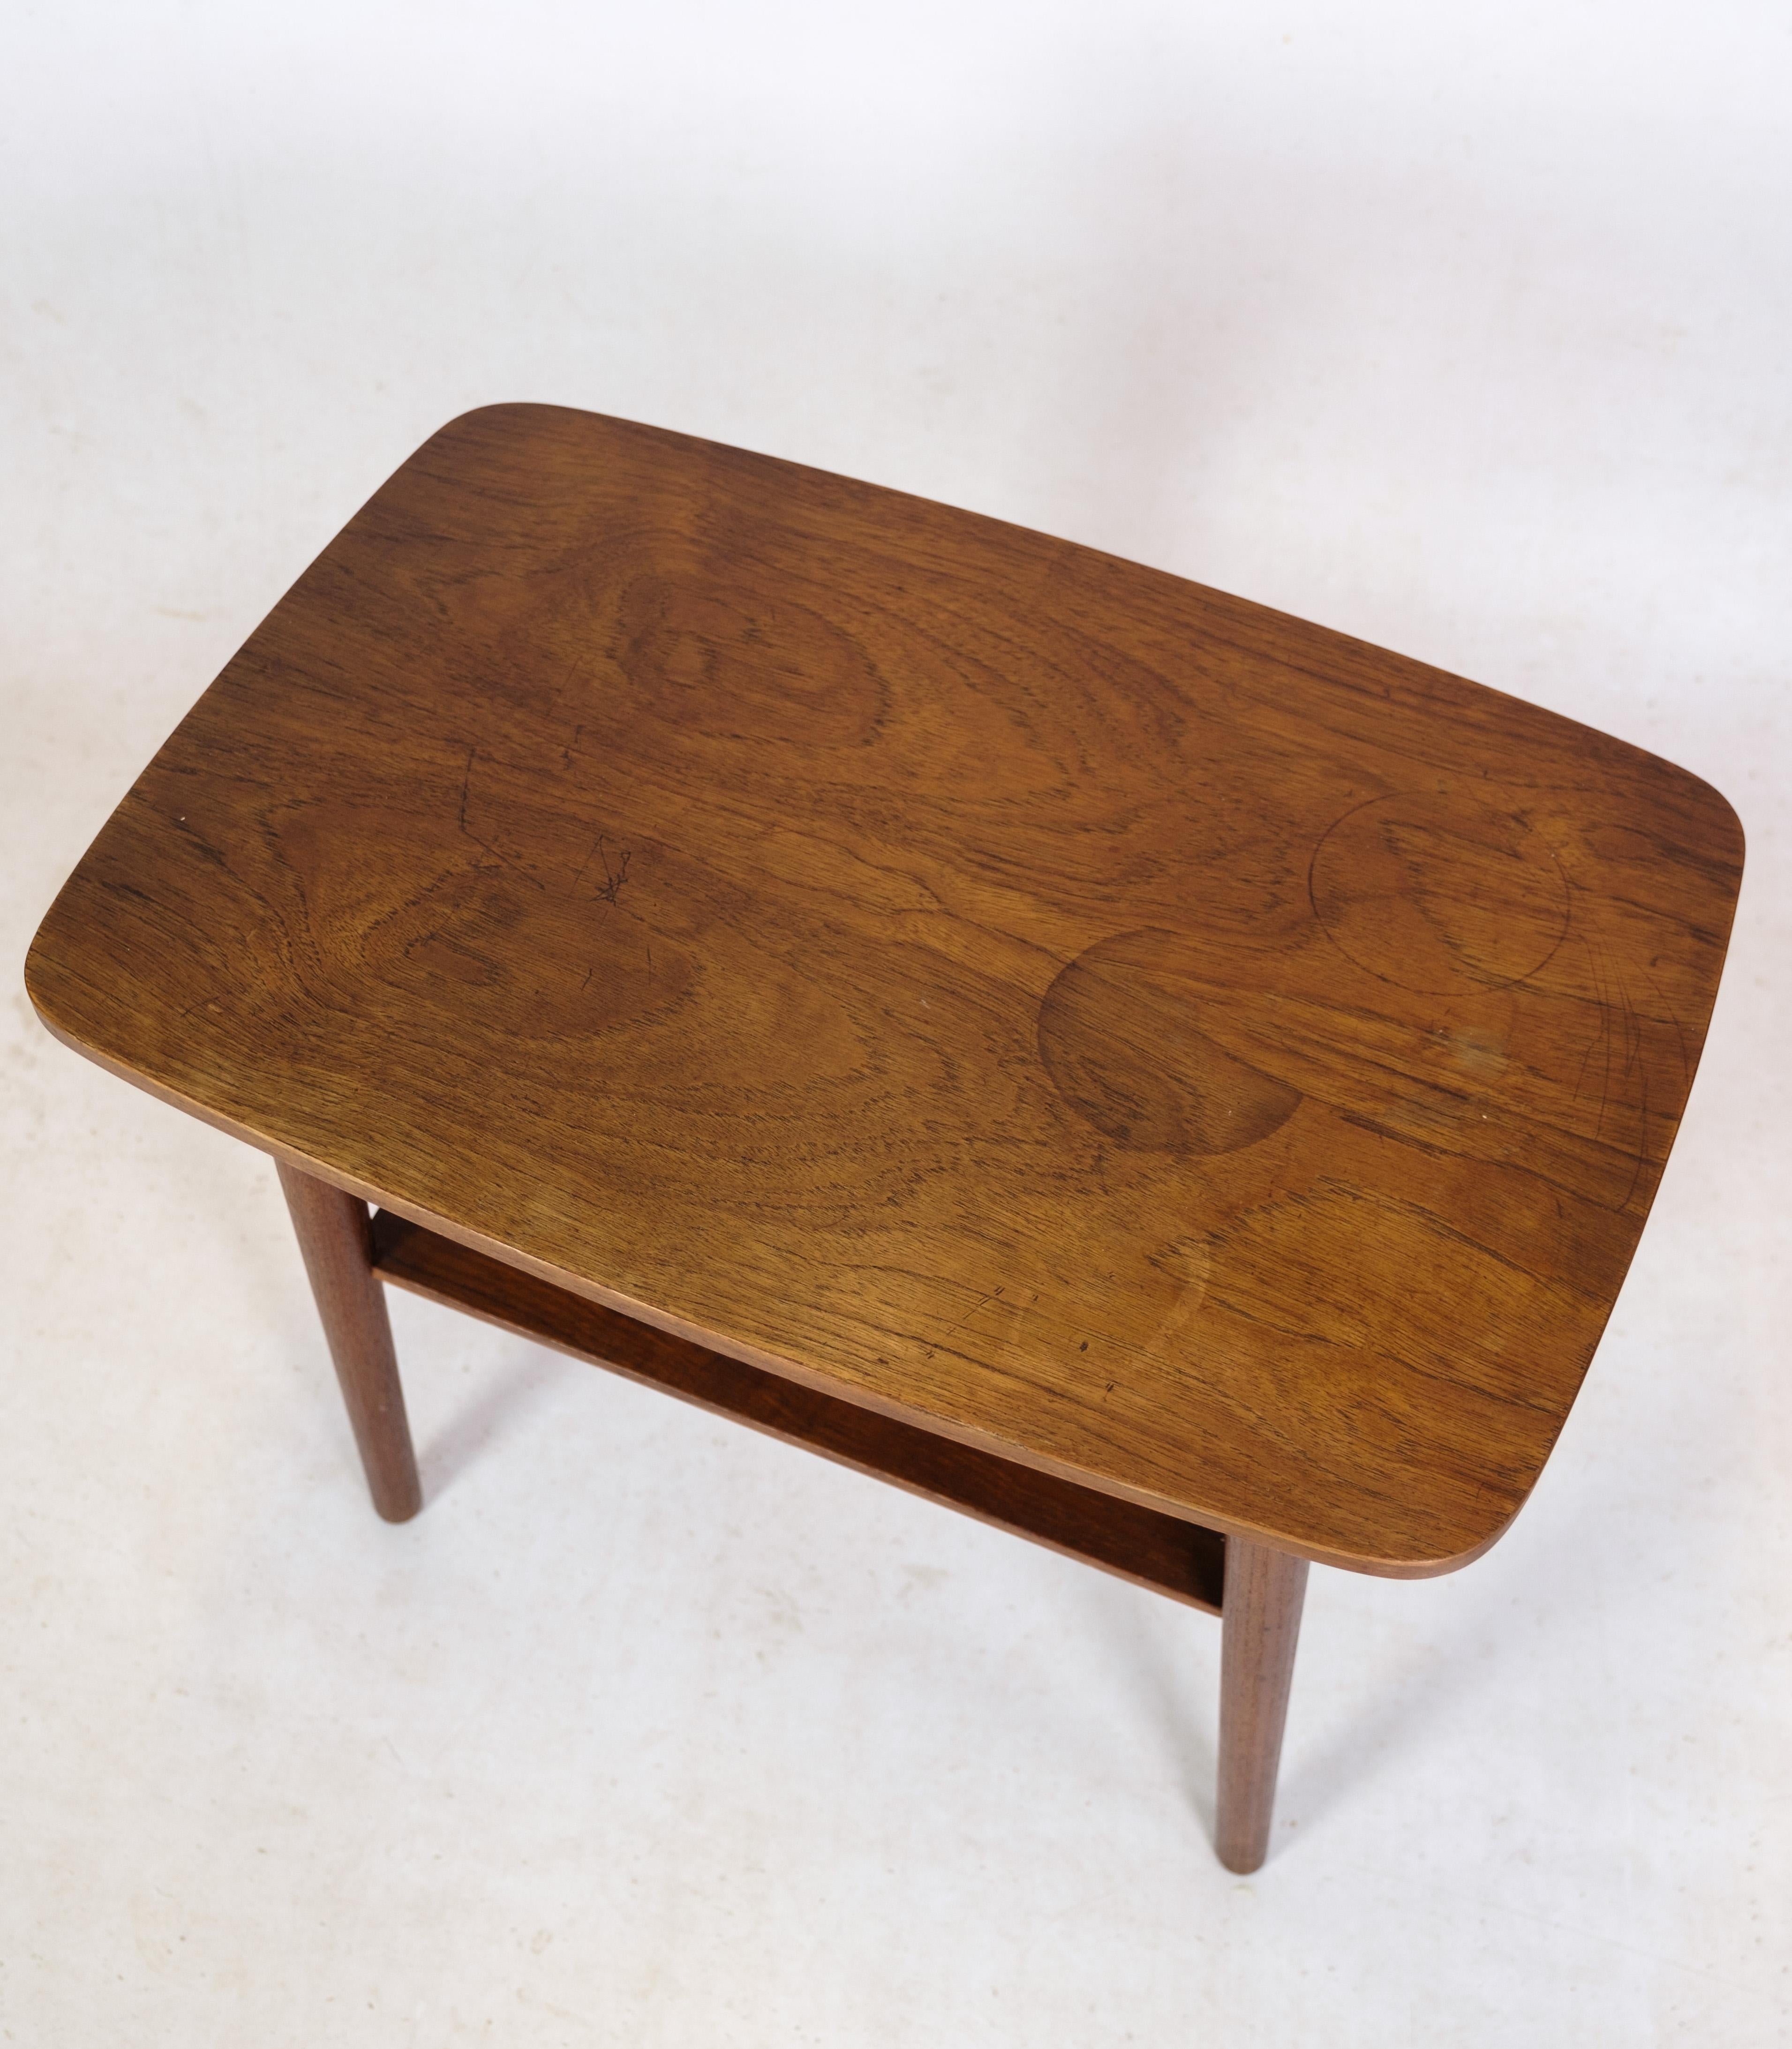 Mid-20th Century Side Table with Drawer and Shelf in Teak Wood of Danish Design from 1960's For Sale